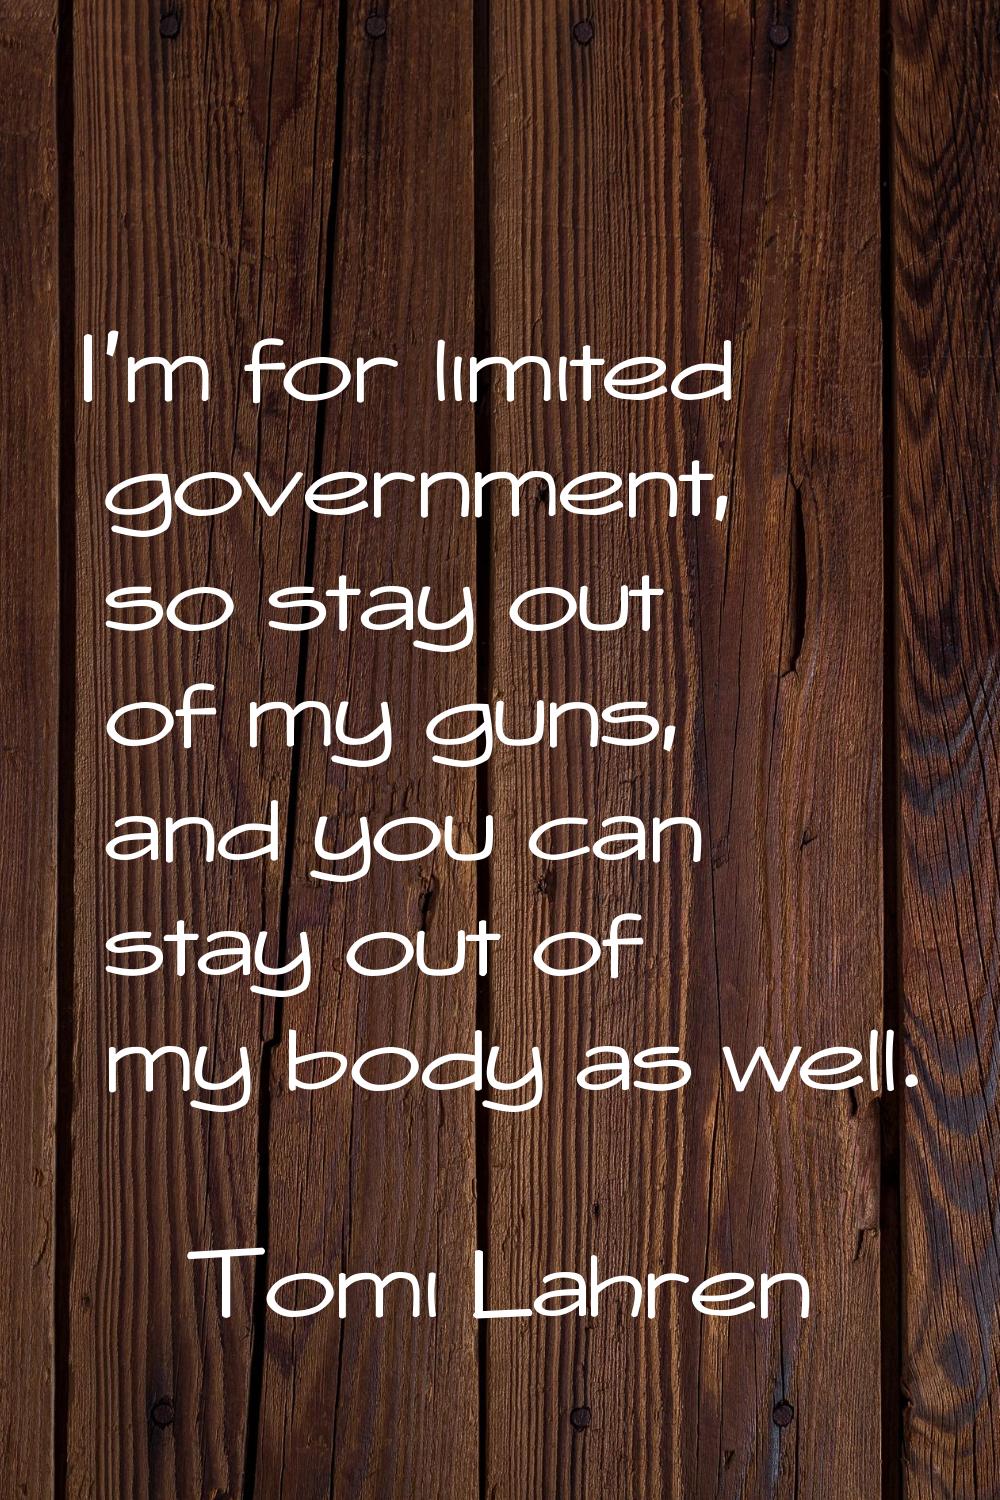 I'm for limited government, so stay out of my guns, and you can stay out of my body as well.